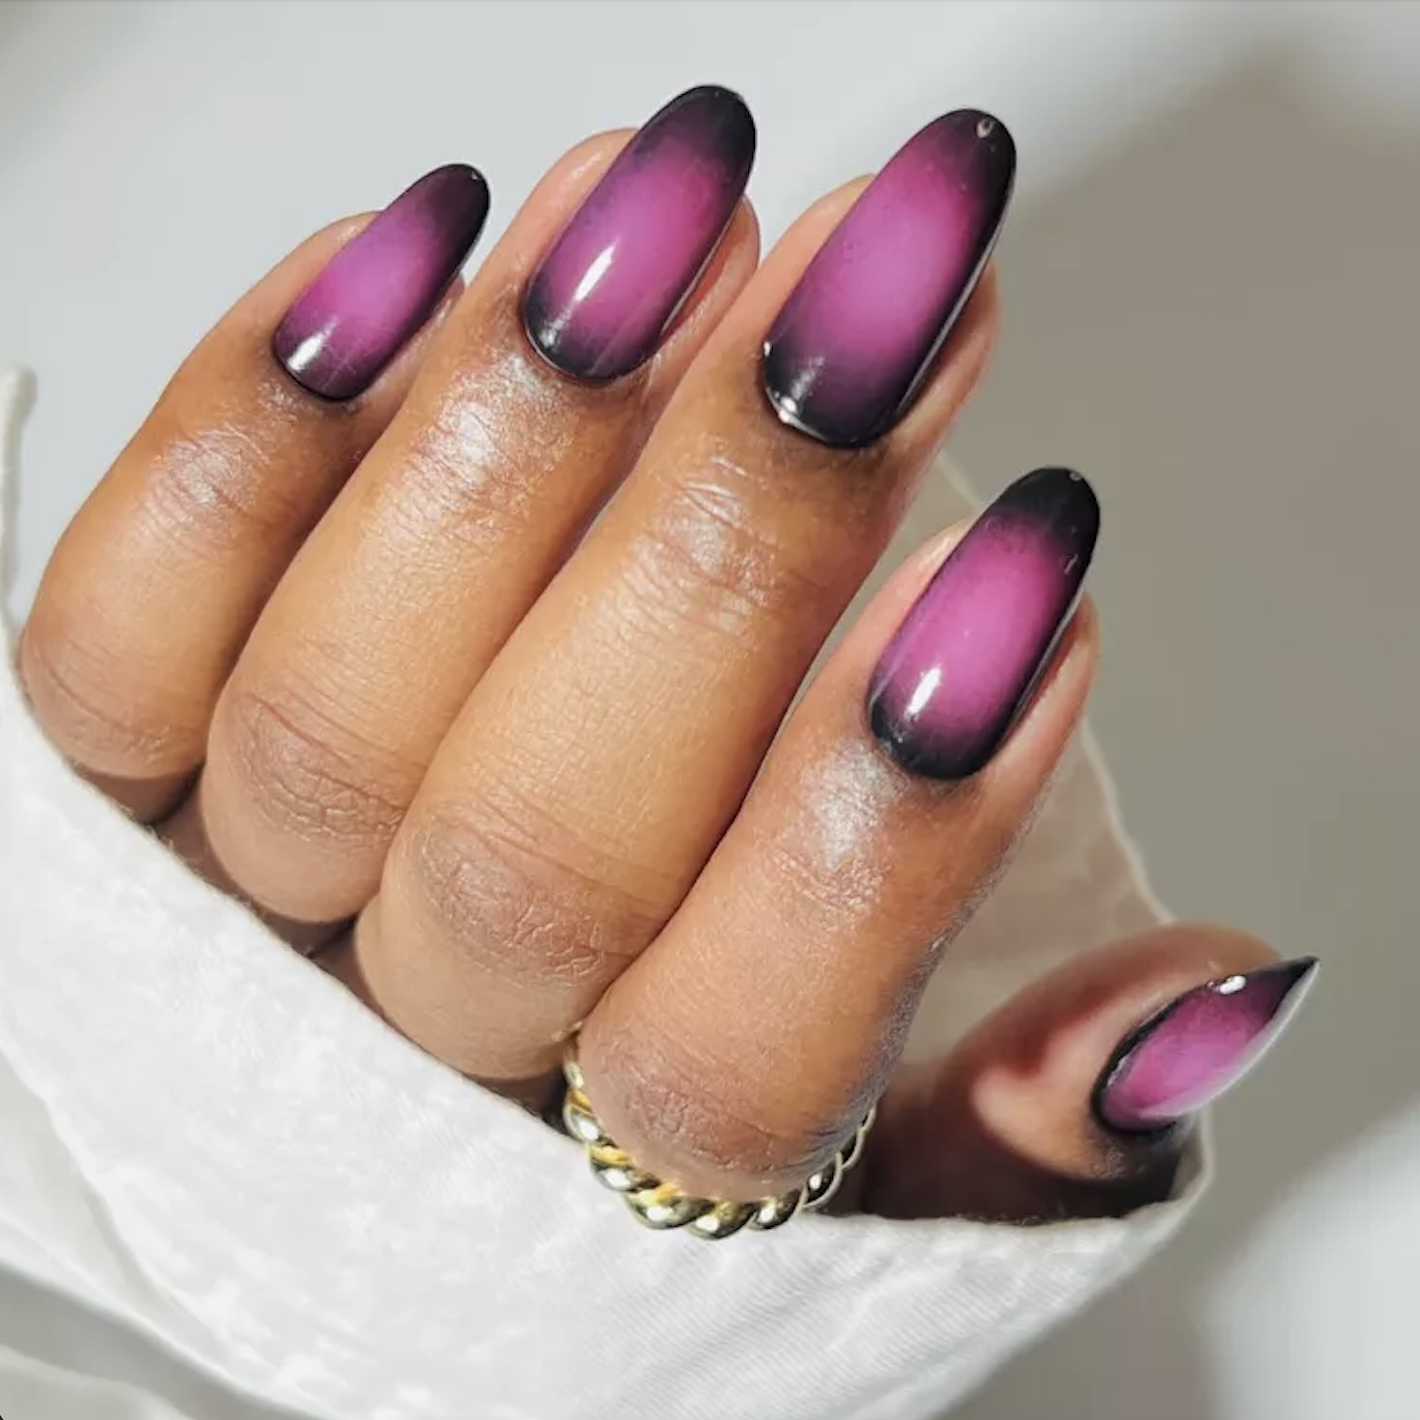 Gothic manicure for Valentine's Day: 10 unconventional ideas for those who do not celebrate February 14